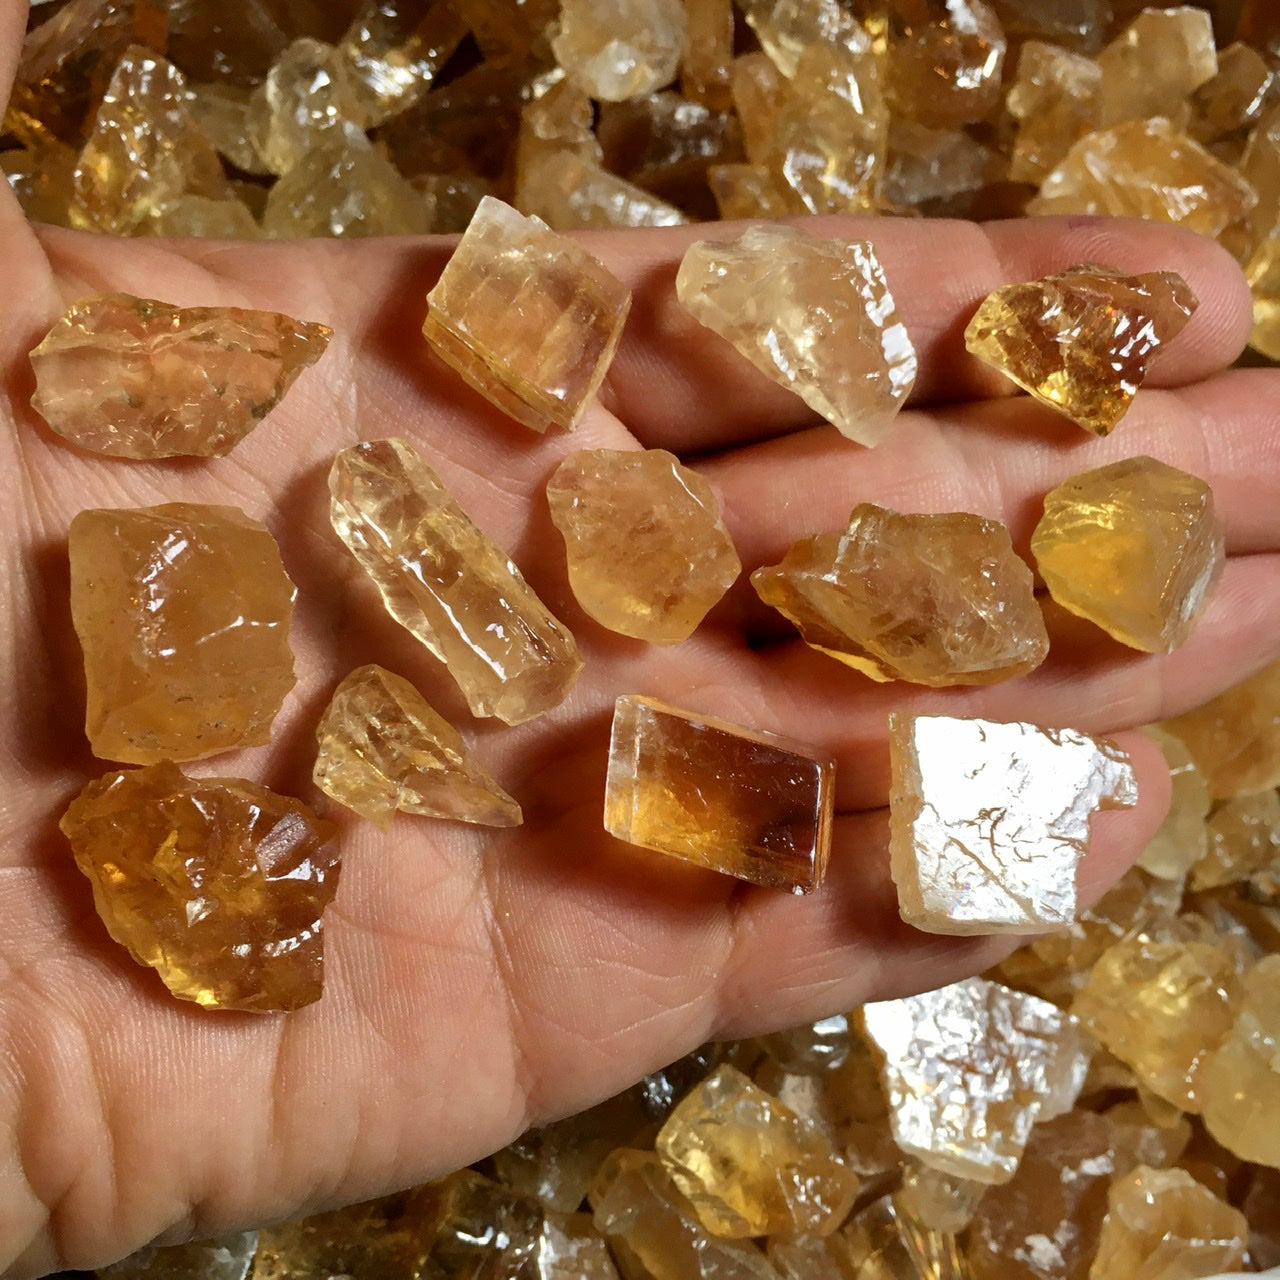 Calcite Collection